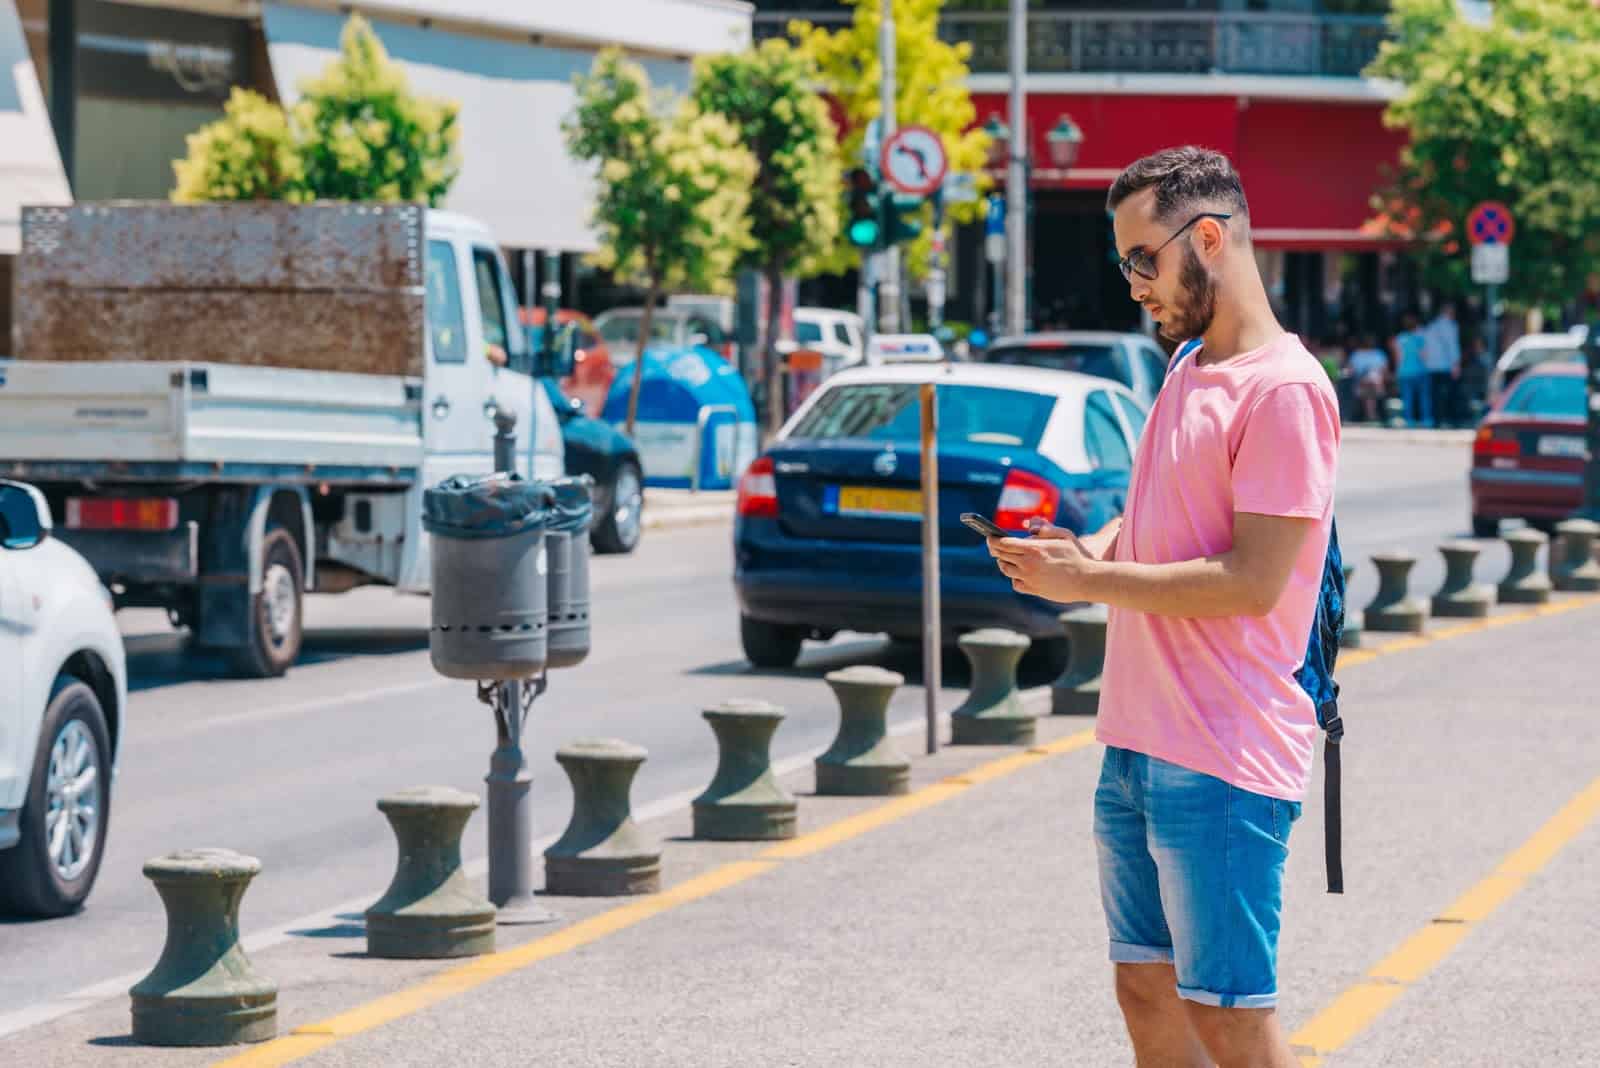 Lyft Ride Pass: A man waits by the side of the road, watching his phone screen for updates on his Lyft ride